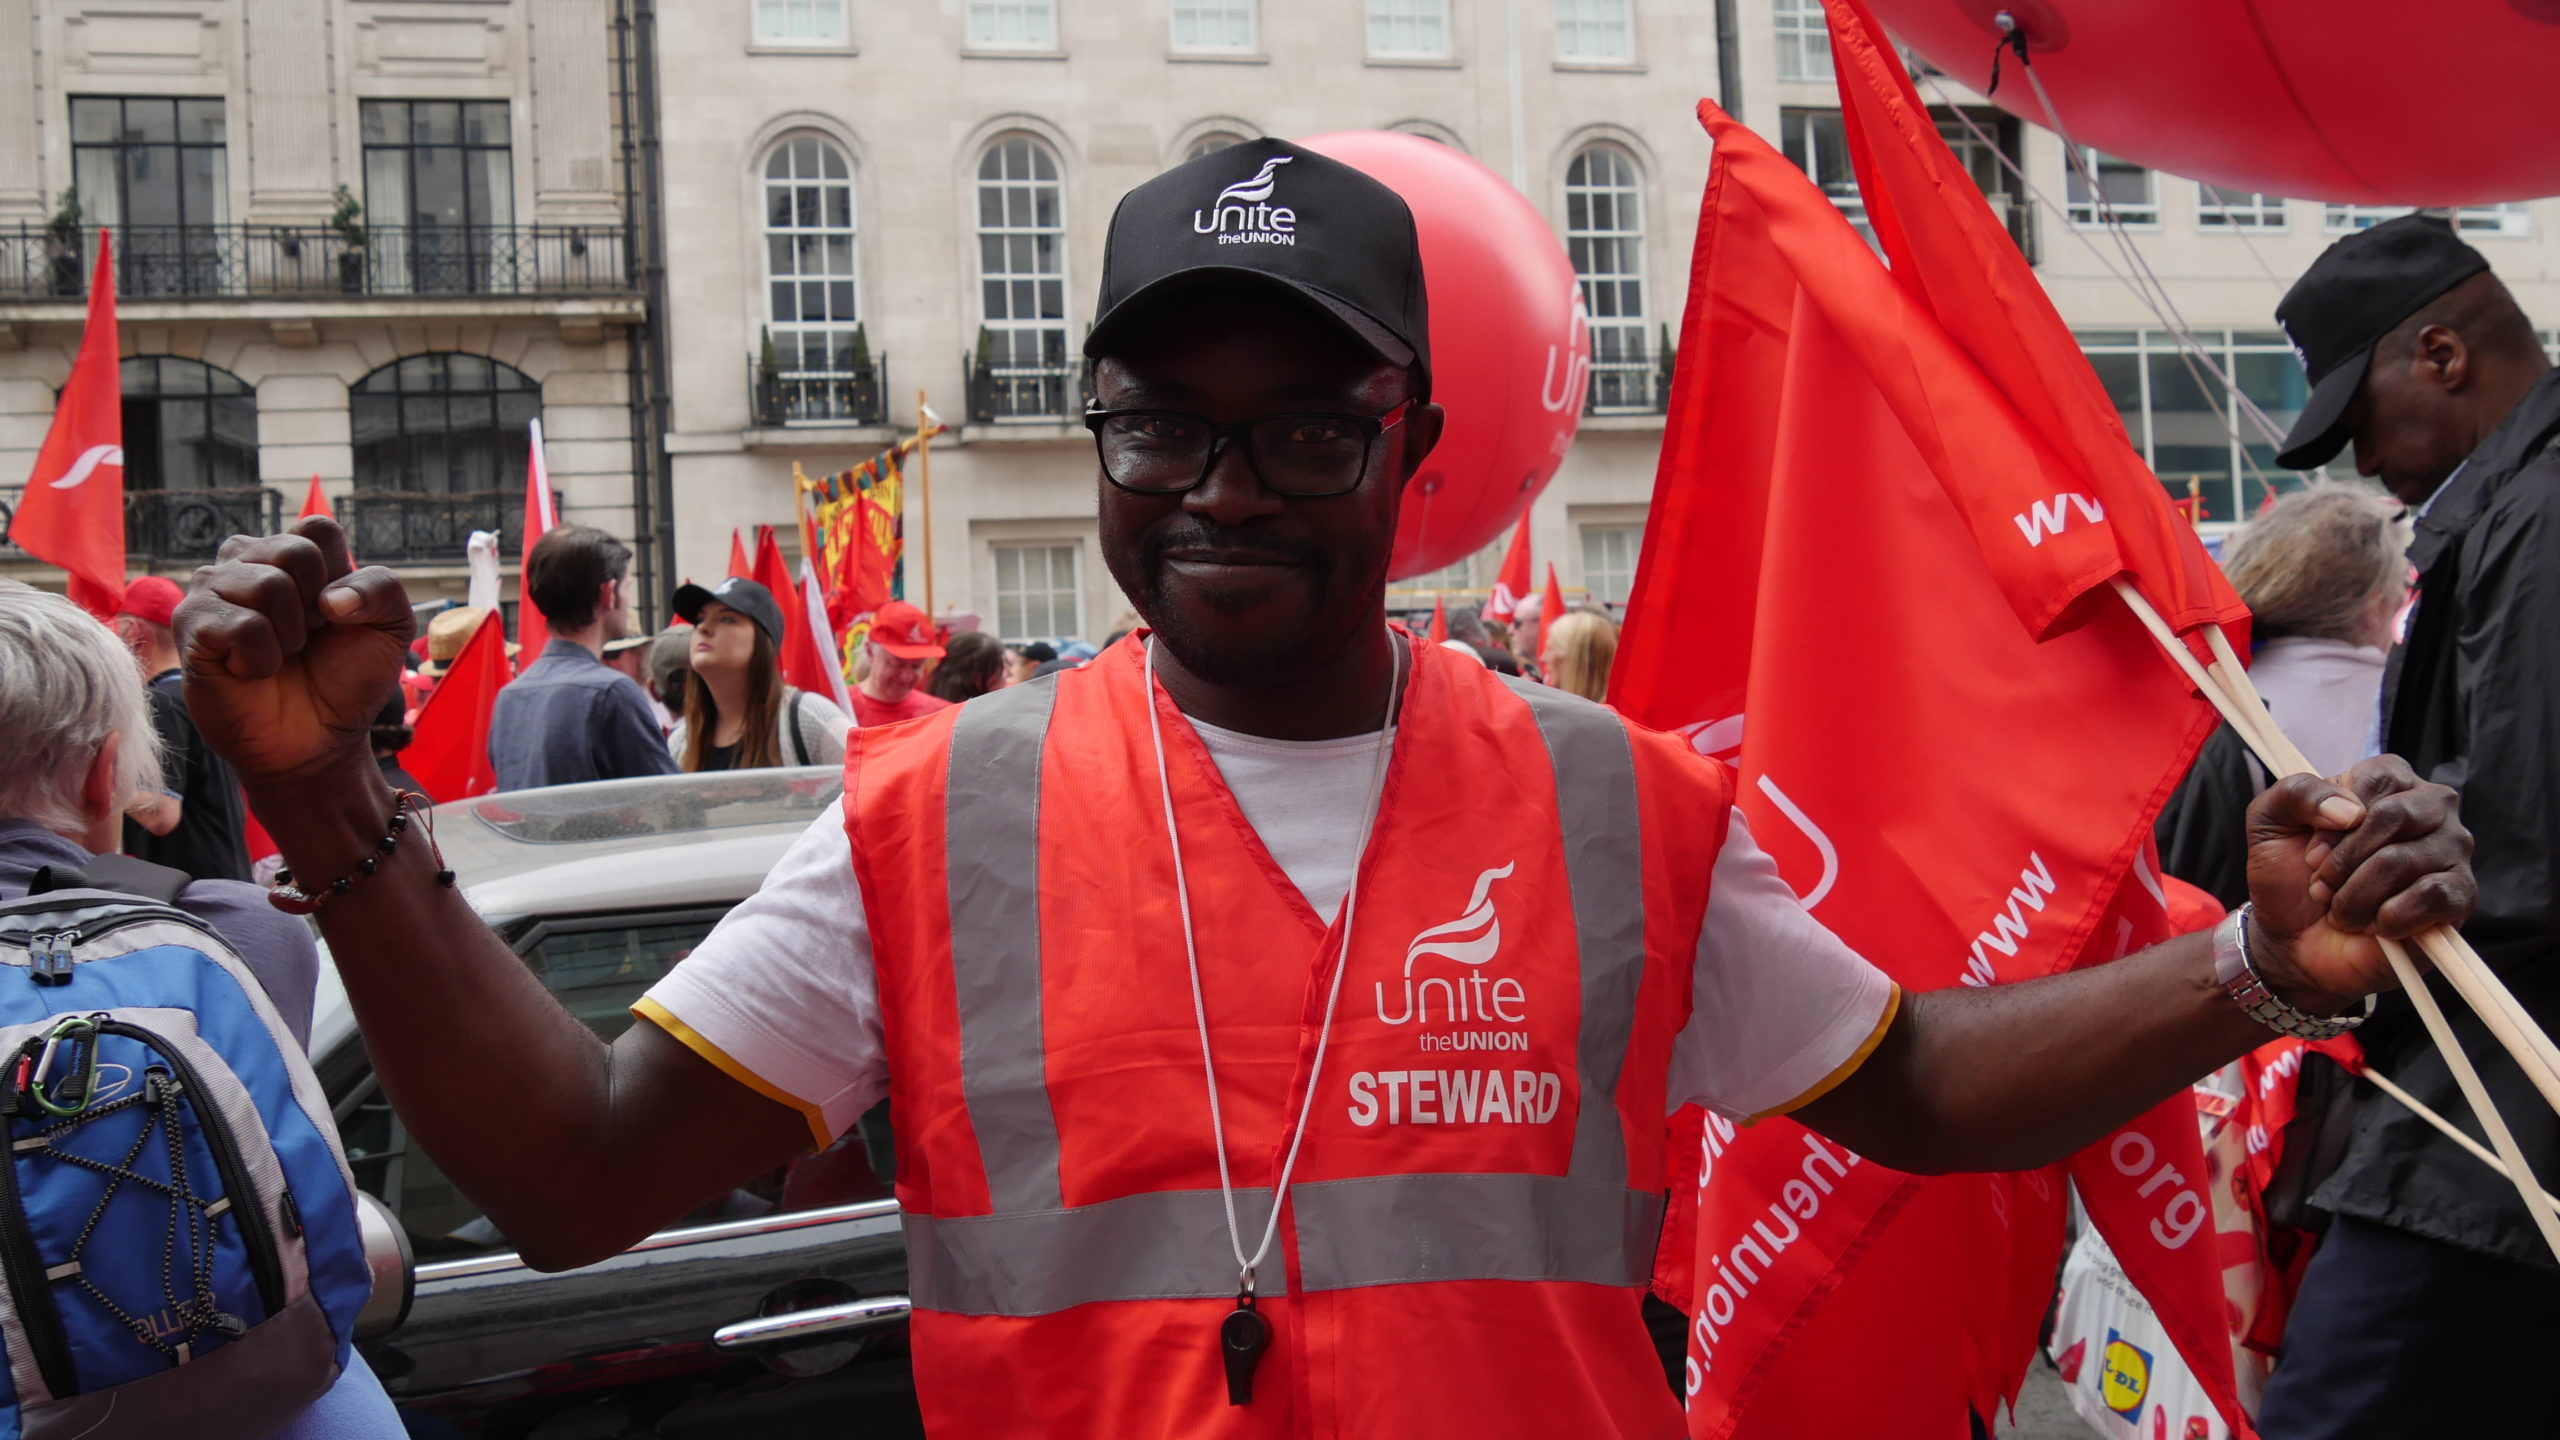 A steward for union Unite directs protestors at a rally to protest low pay in London last month